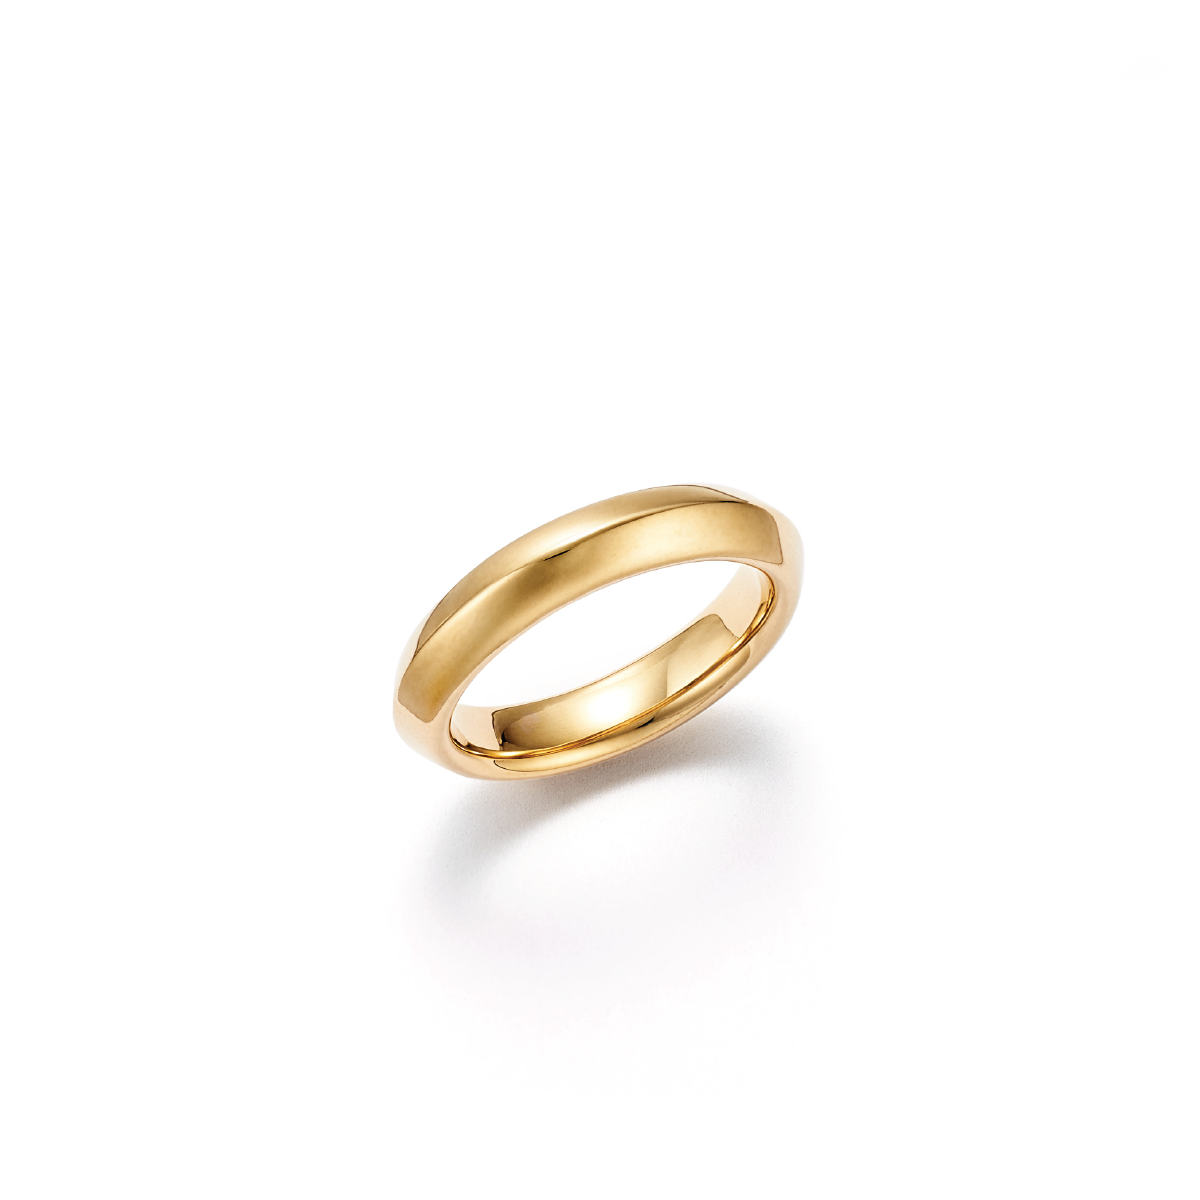 Amore Ridge - 18kt Certified Fairmined Ecological Gold Wedding Ring - Full View